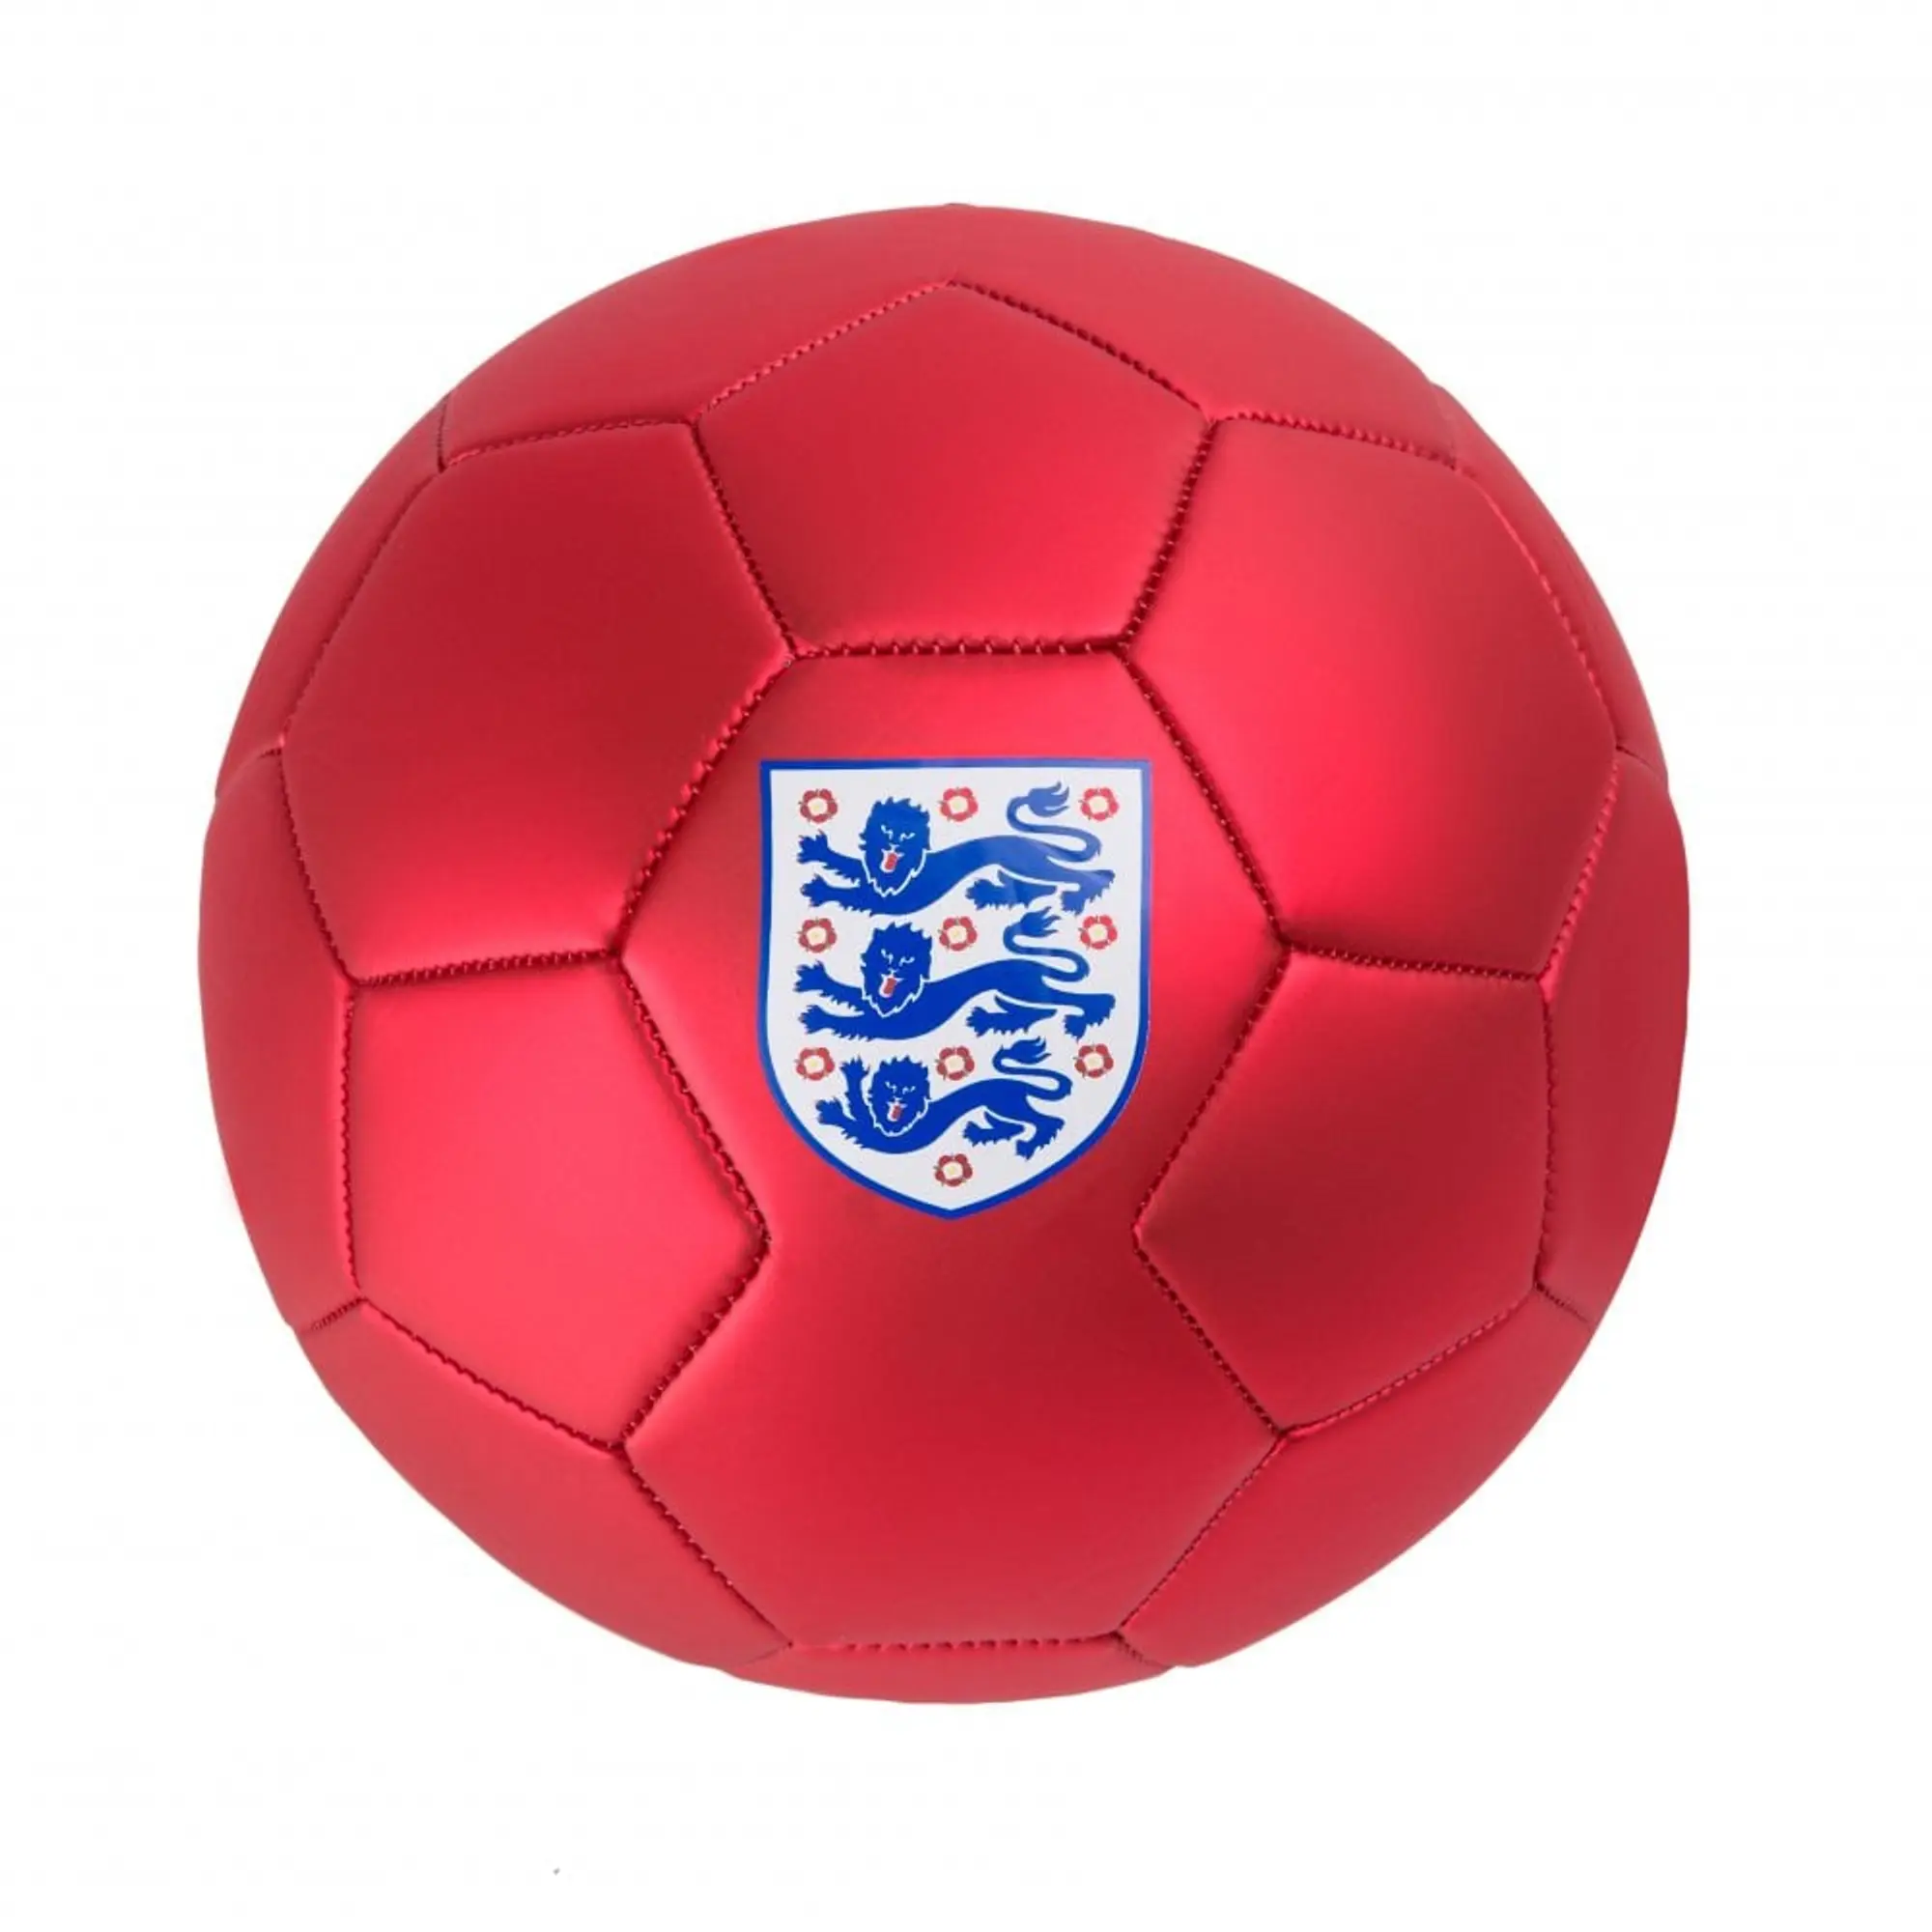 Mitre England Football - Red/White